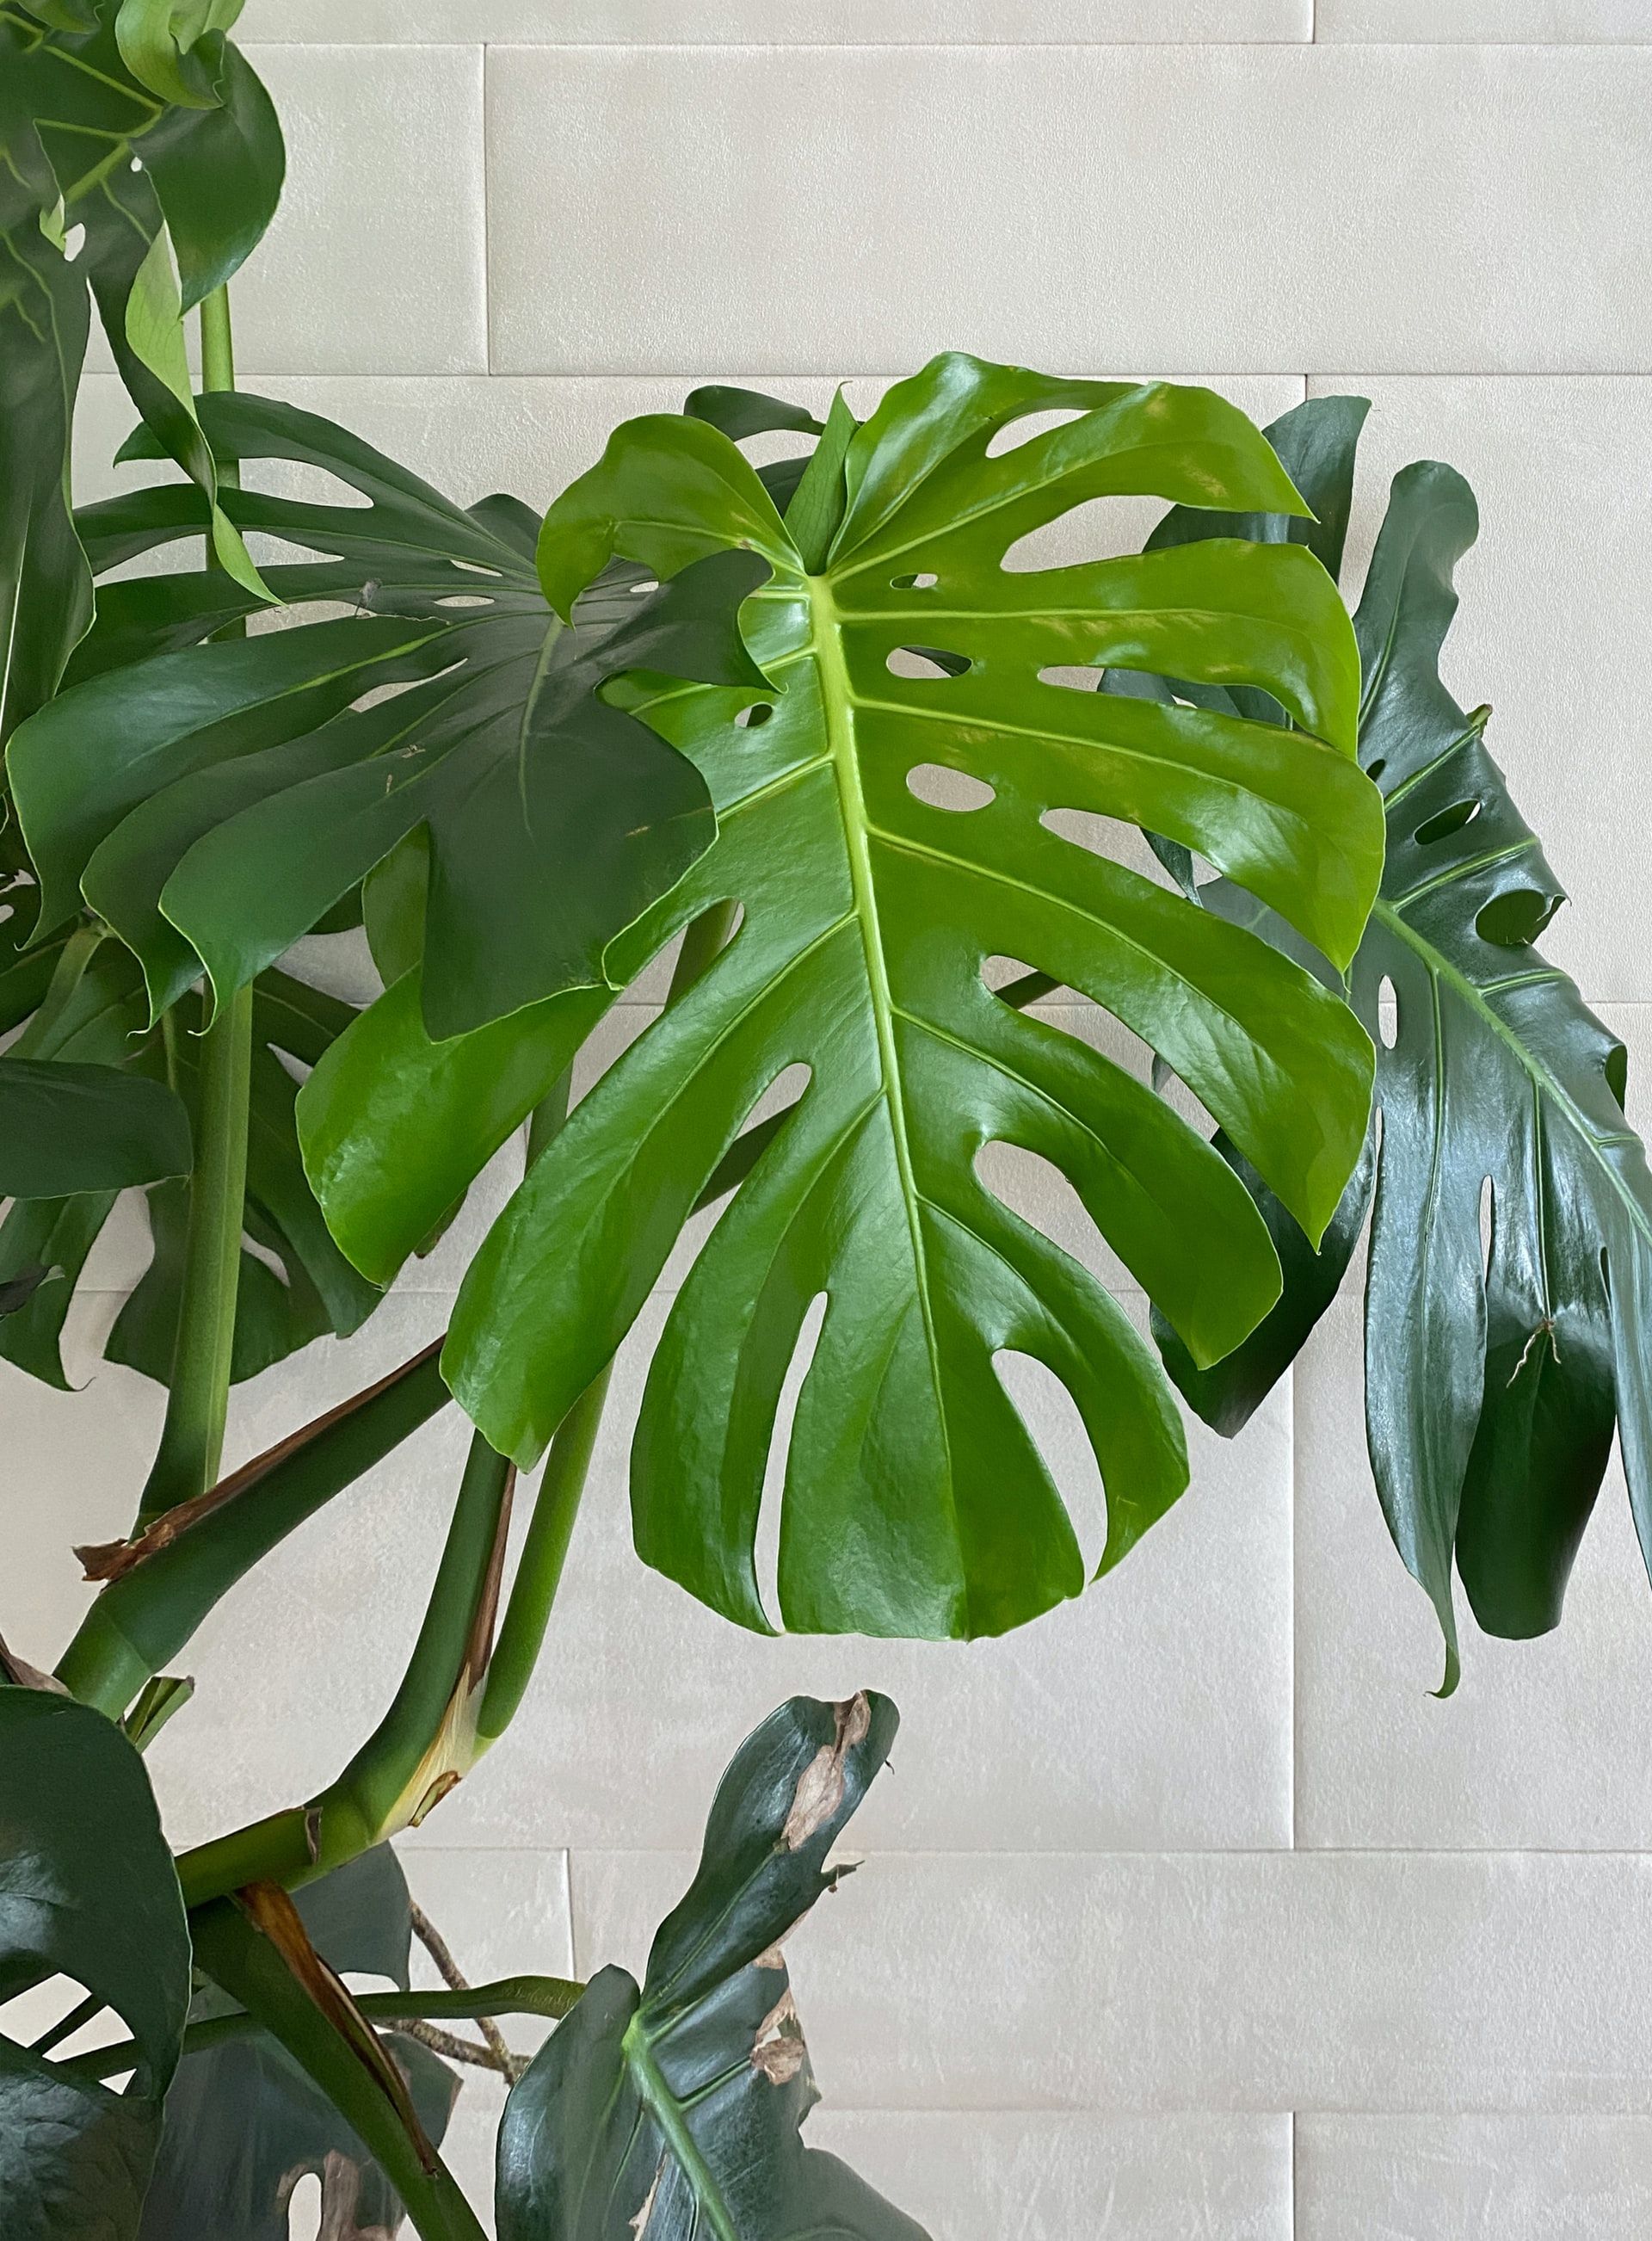 Monstera, also known as a cheese plant